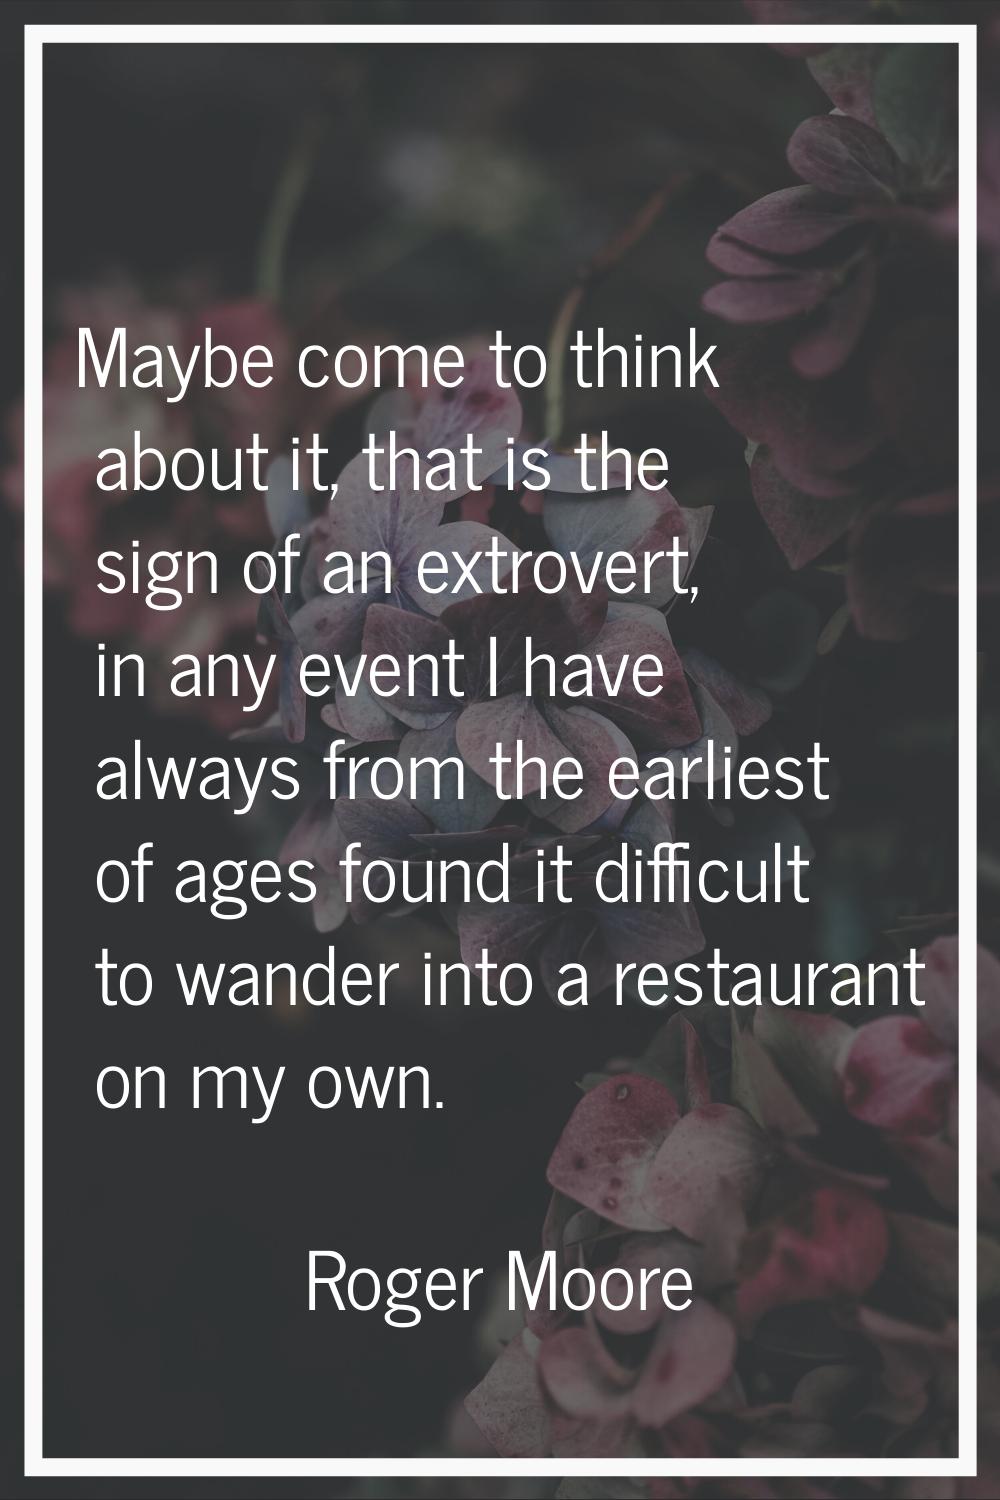 Maybe come to think about it, that is the sign of an extrovert, in any event I have always from the